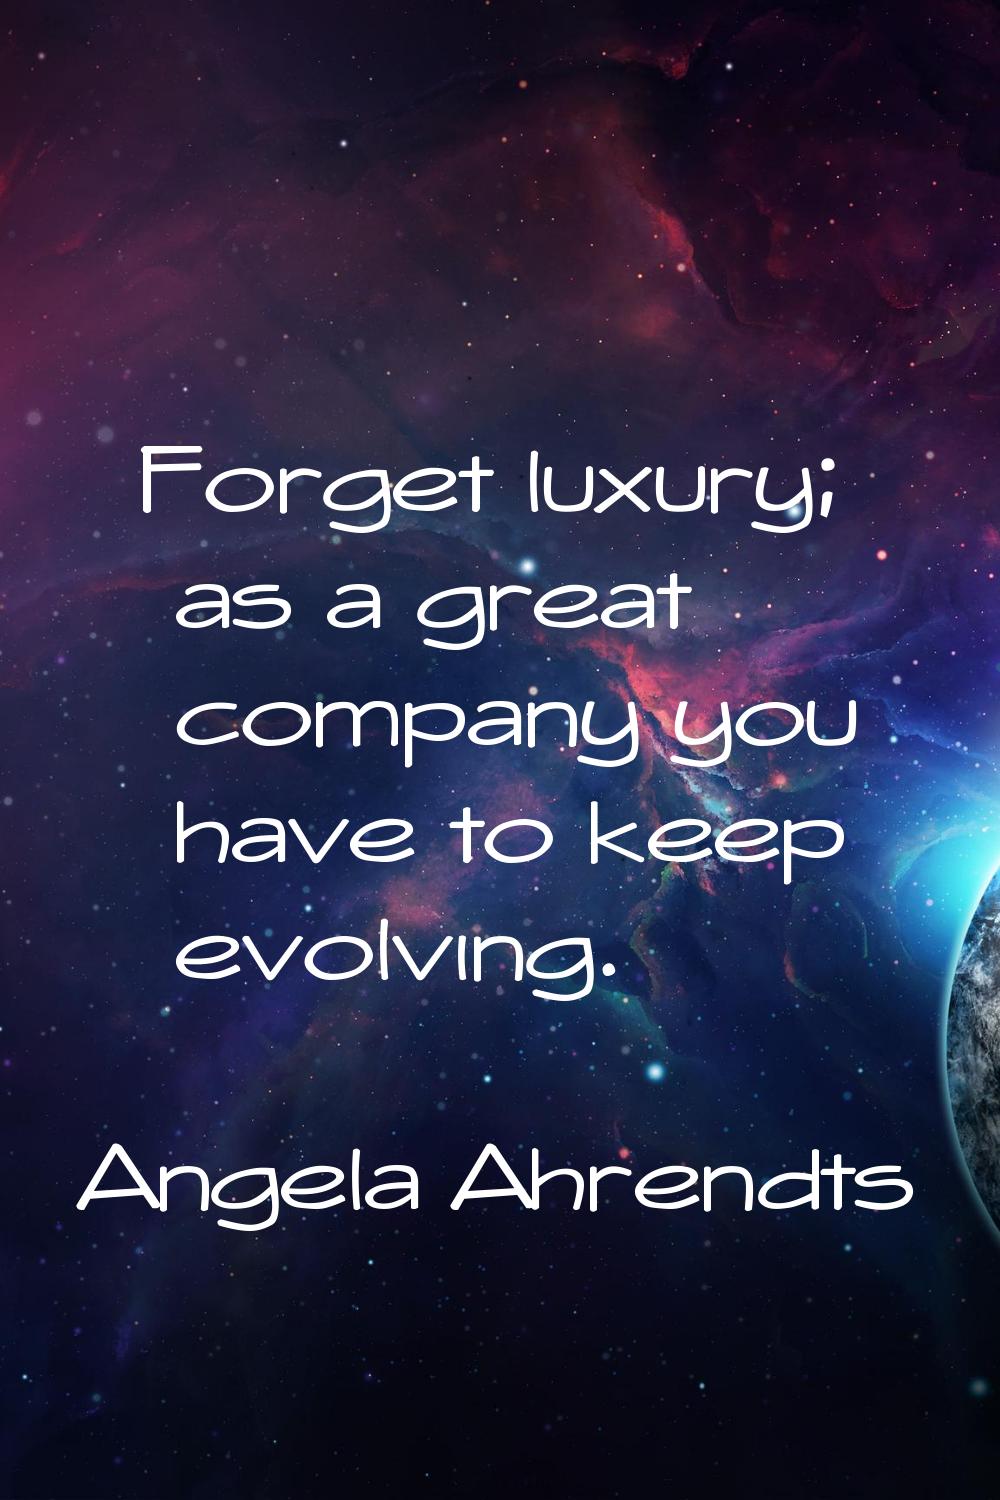 Forget luxury; as a great company you have to keep evolving.